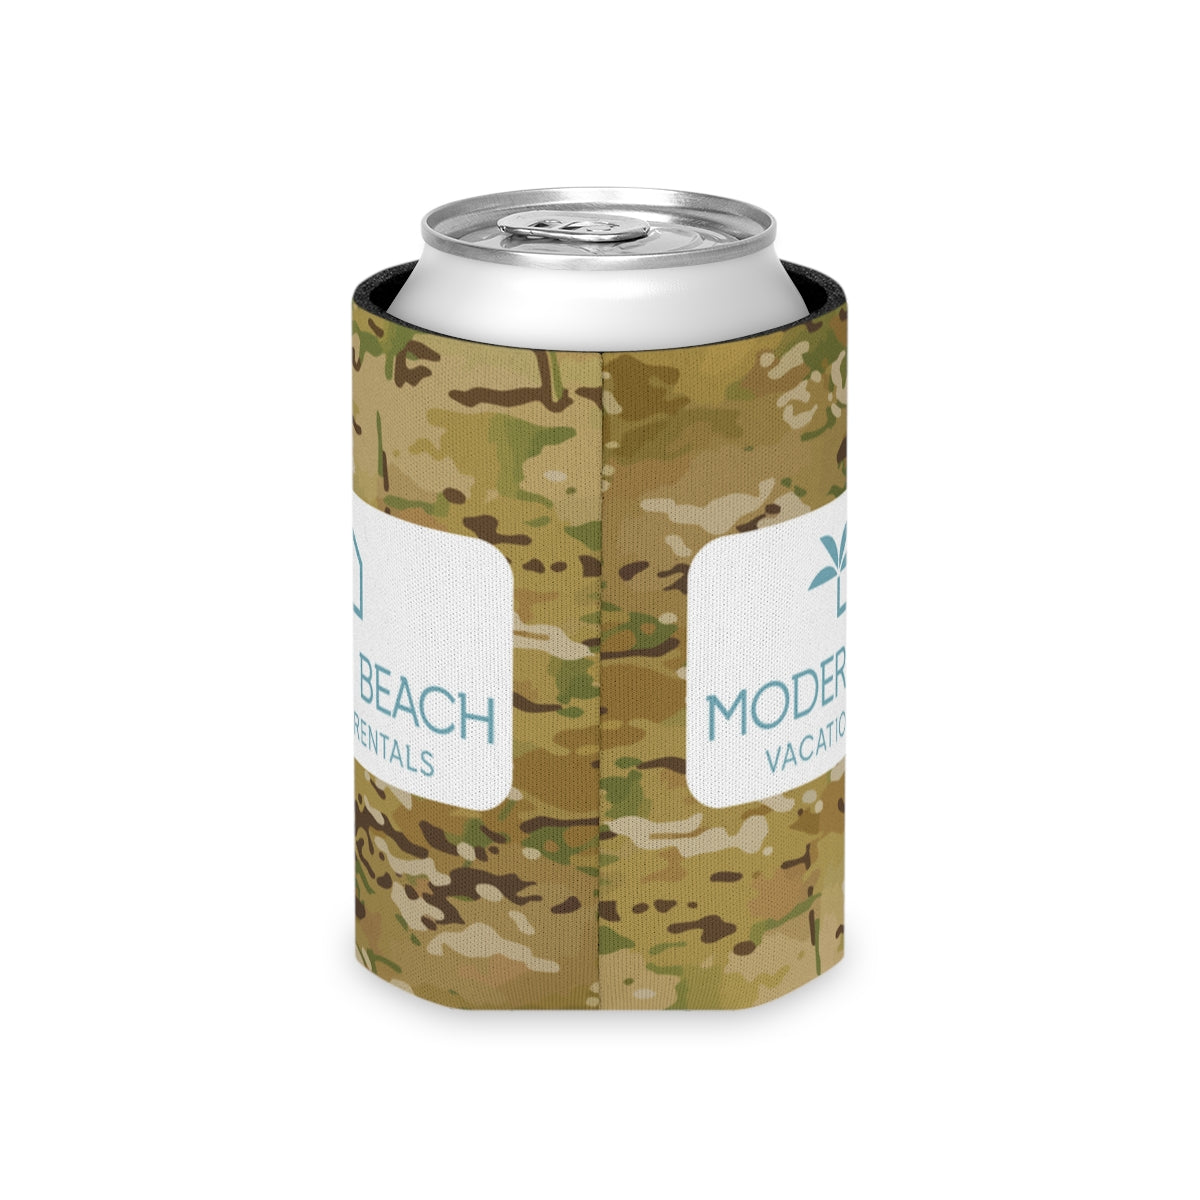 Modern Beach Vacation Rentals Basic Rectangle Logo Camouflage OCP Can Coozie Cooler